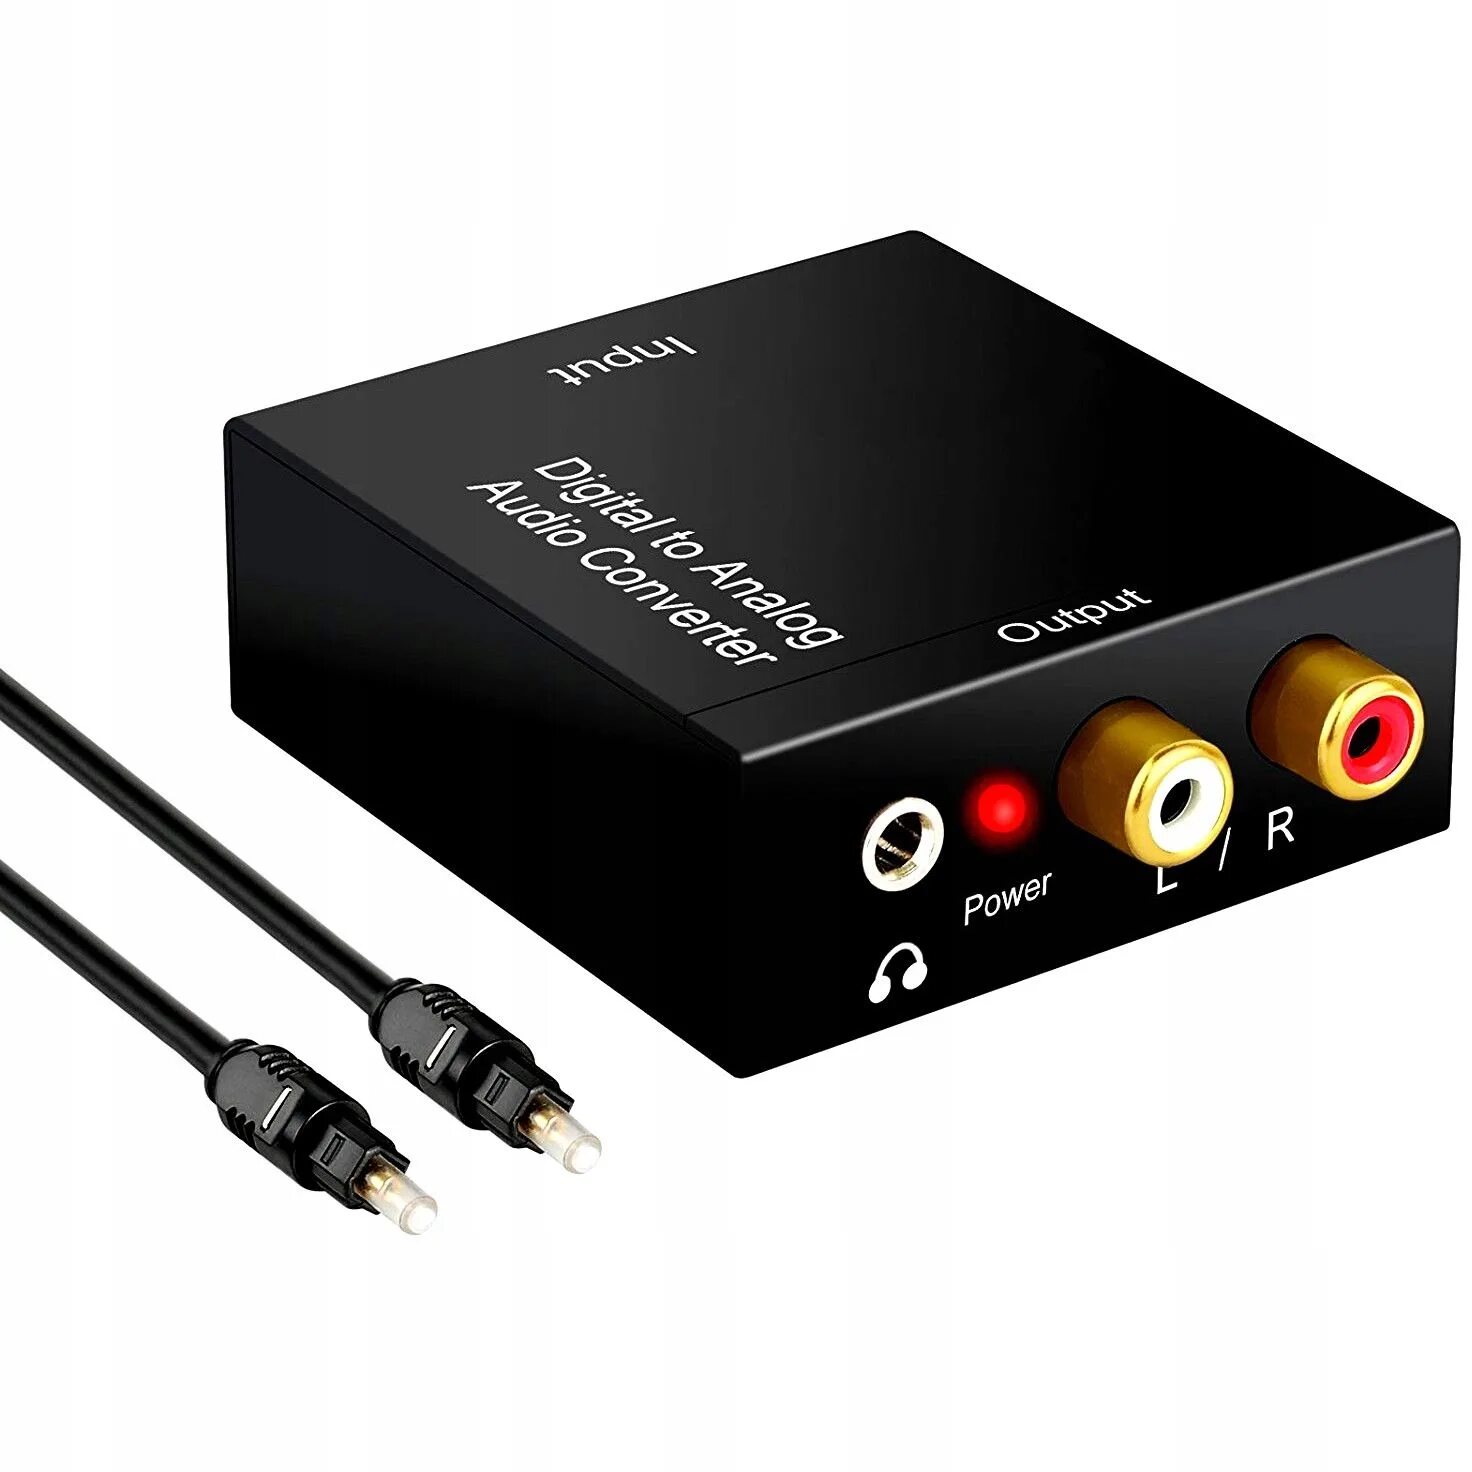 Optical Audio Toslink Coaxial. RCA to Toslink адаптер. SPDIF to 3.5 Jack адаптер. SPDIF Coaxial to 3.5mm Jack.